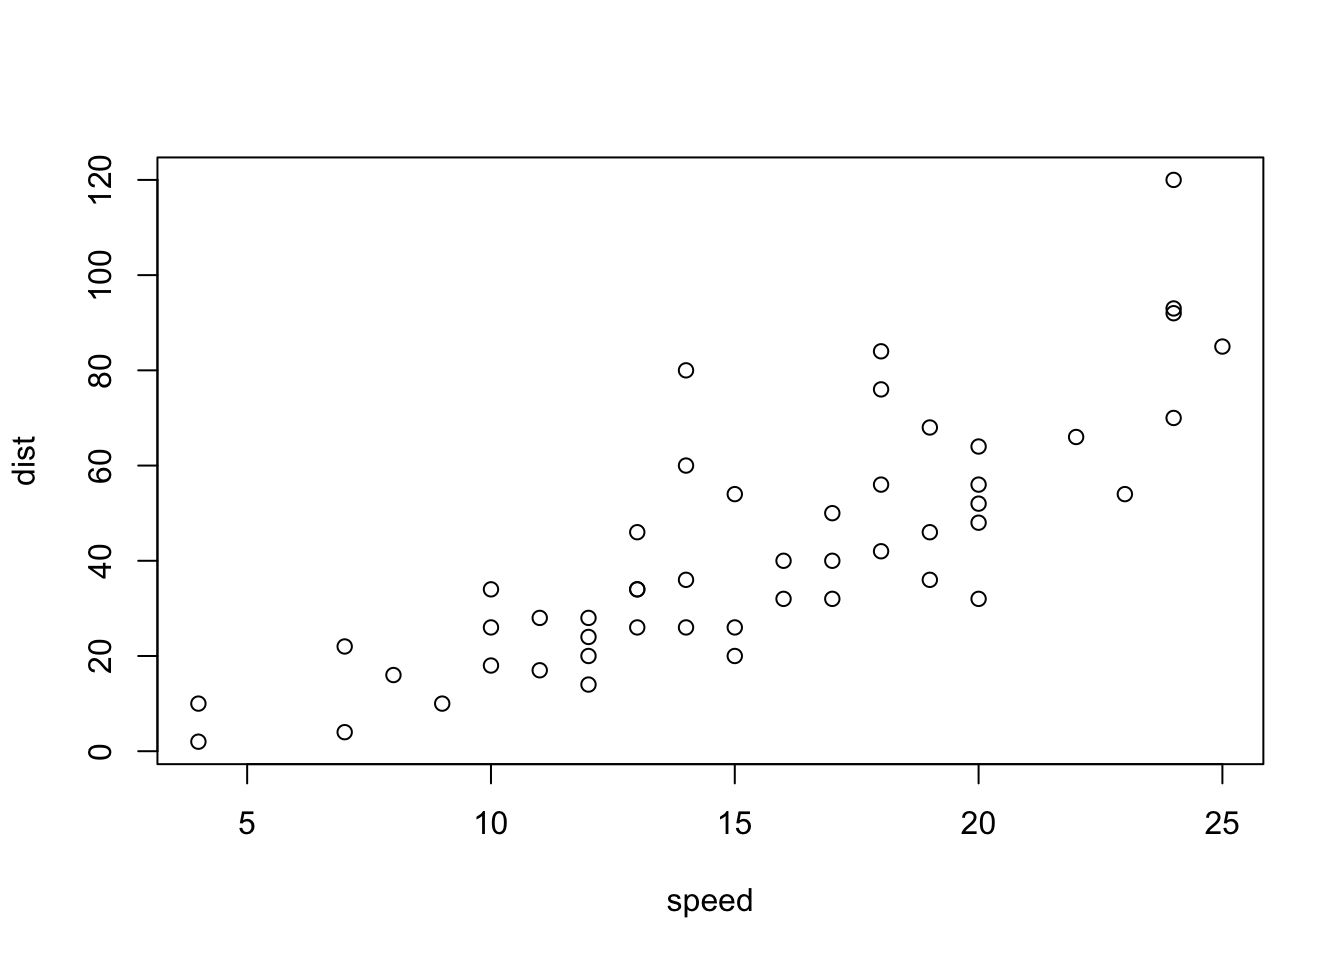 A scatterplot showing the relationship between speed and distance of cars. The two are strongly positively correlated, meaning cars moving at a faster speed go a further distance (I think).